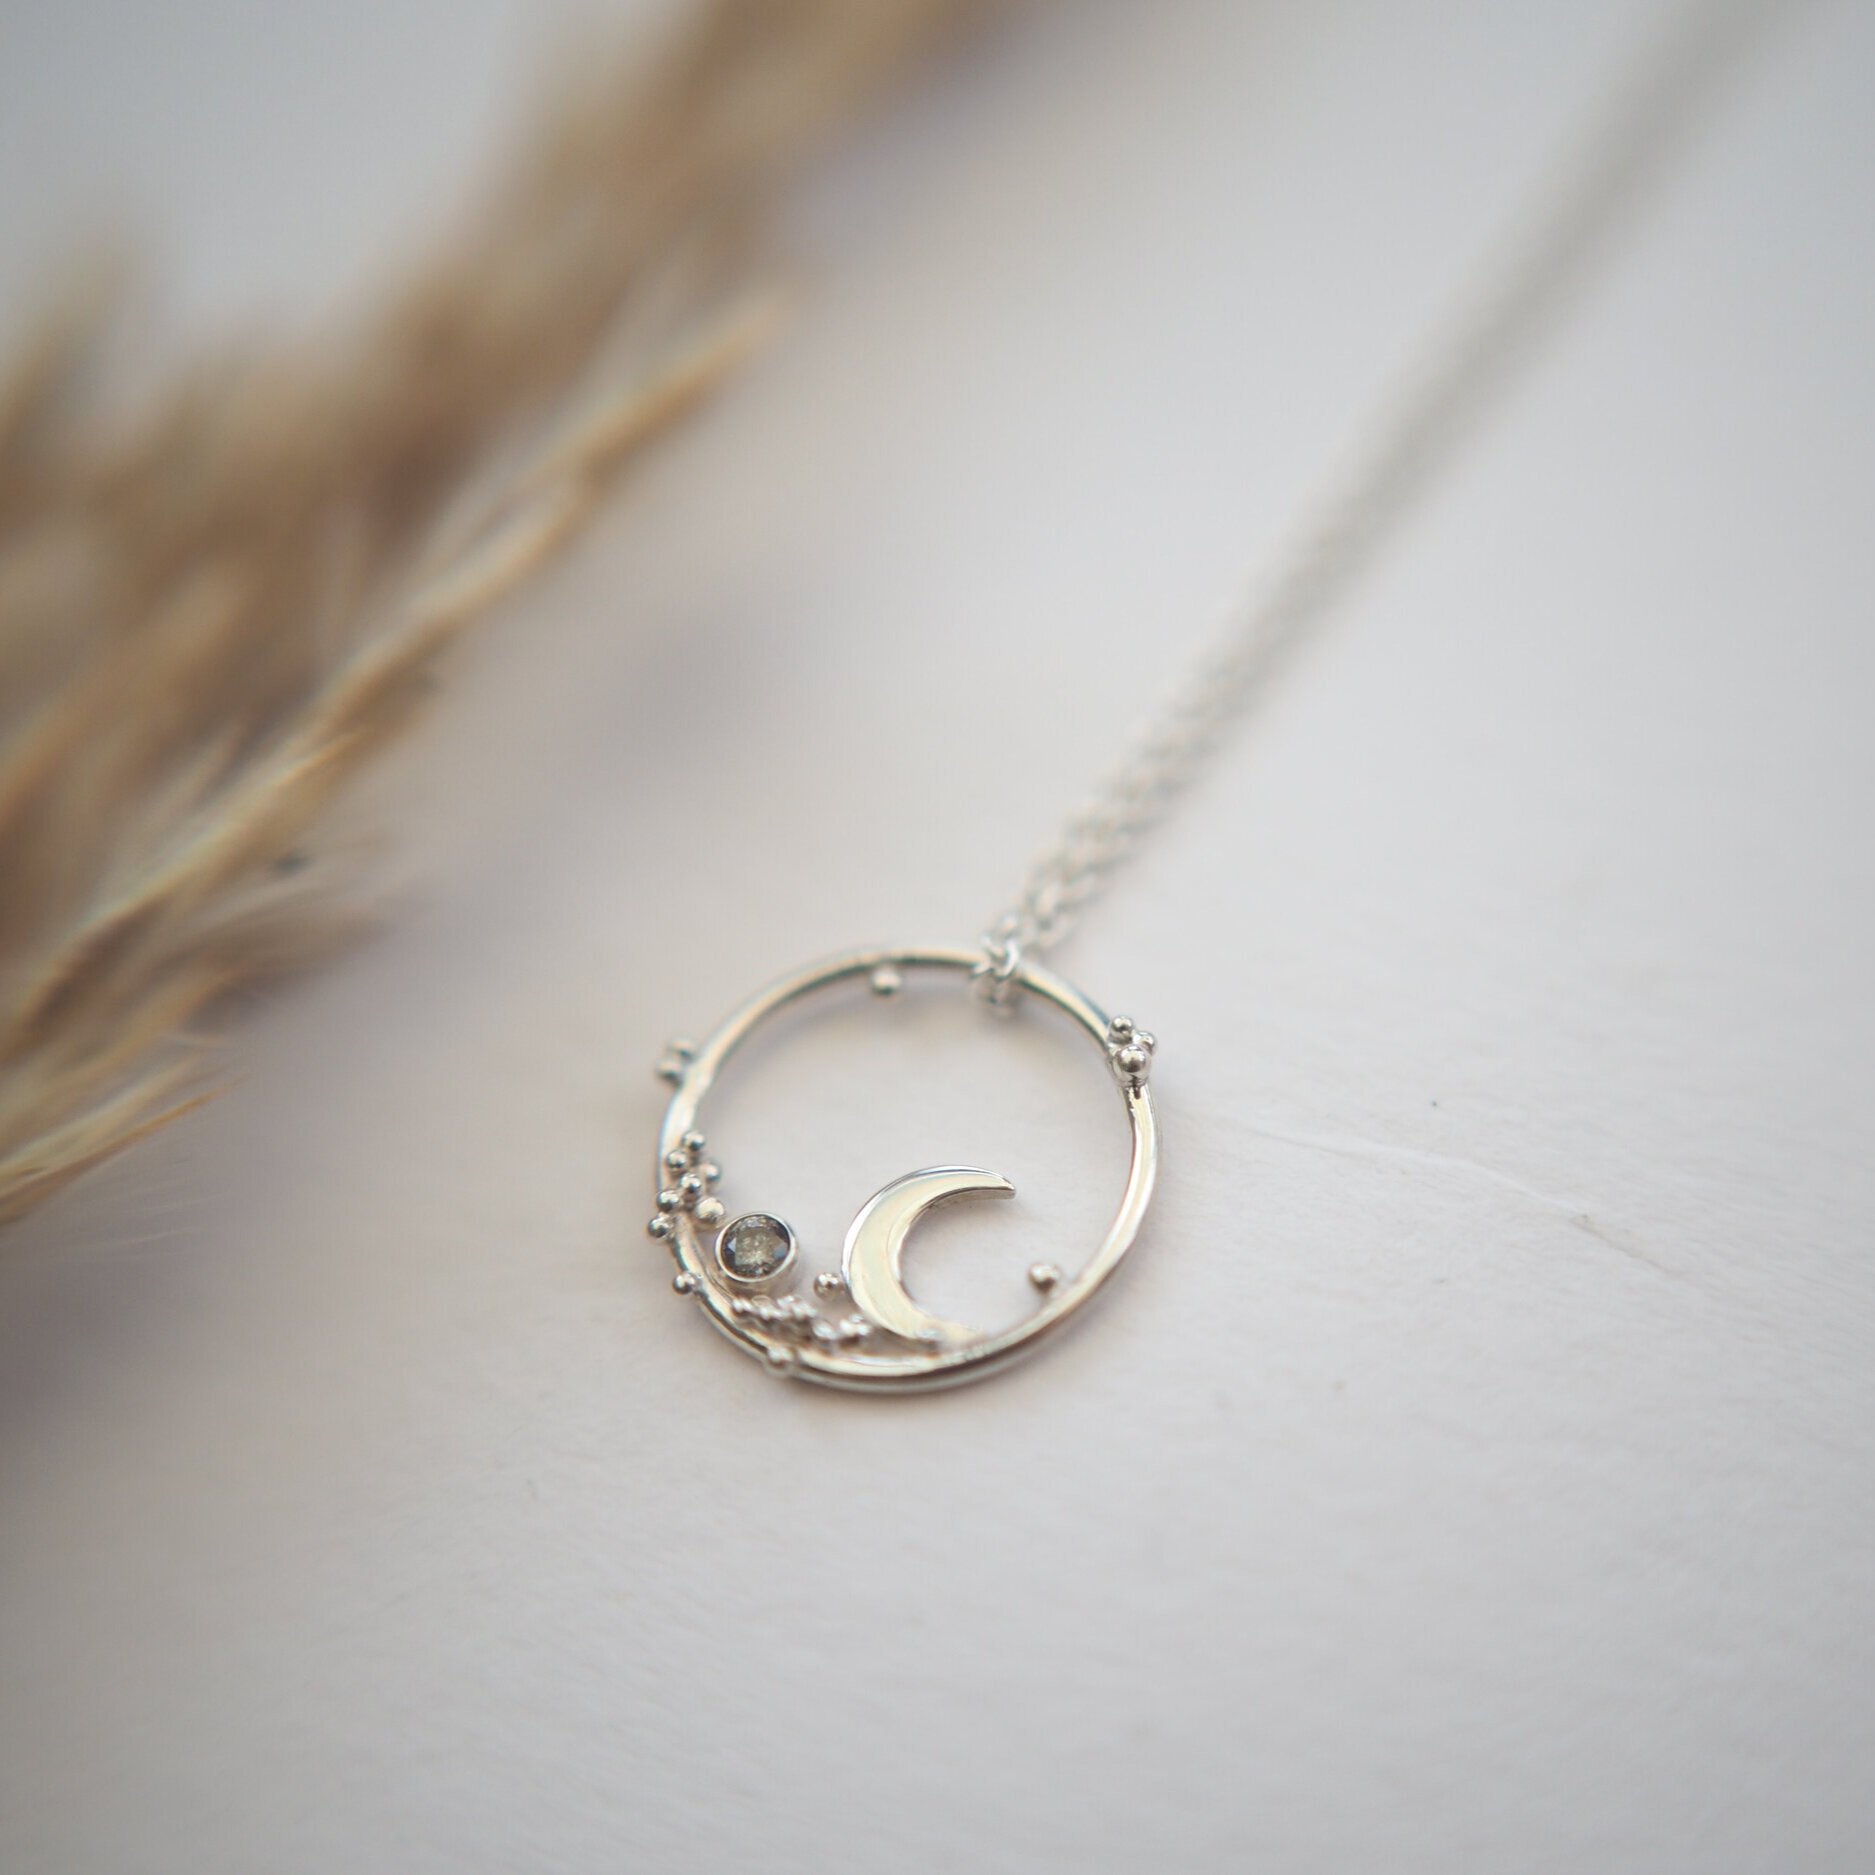 Recycled silver crescent moon pendant with silver starts scattered across and a salt and pepper diamond